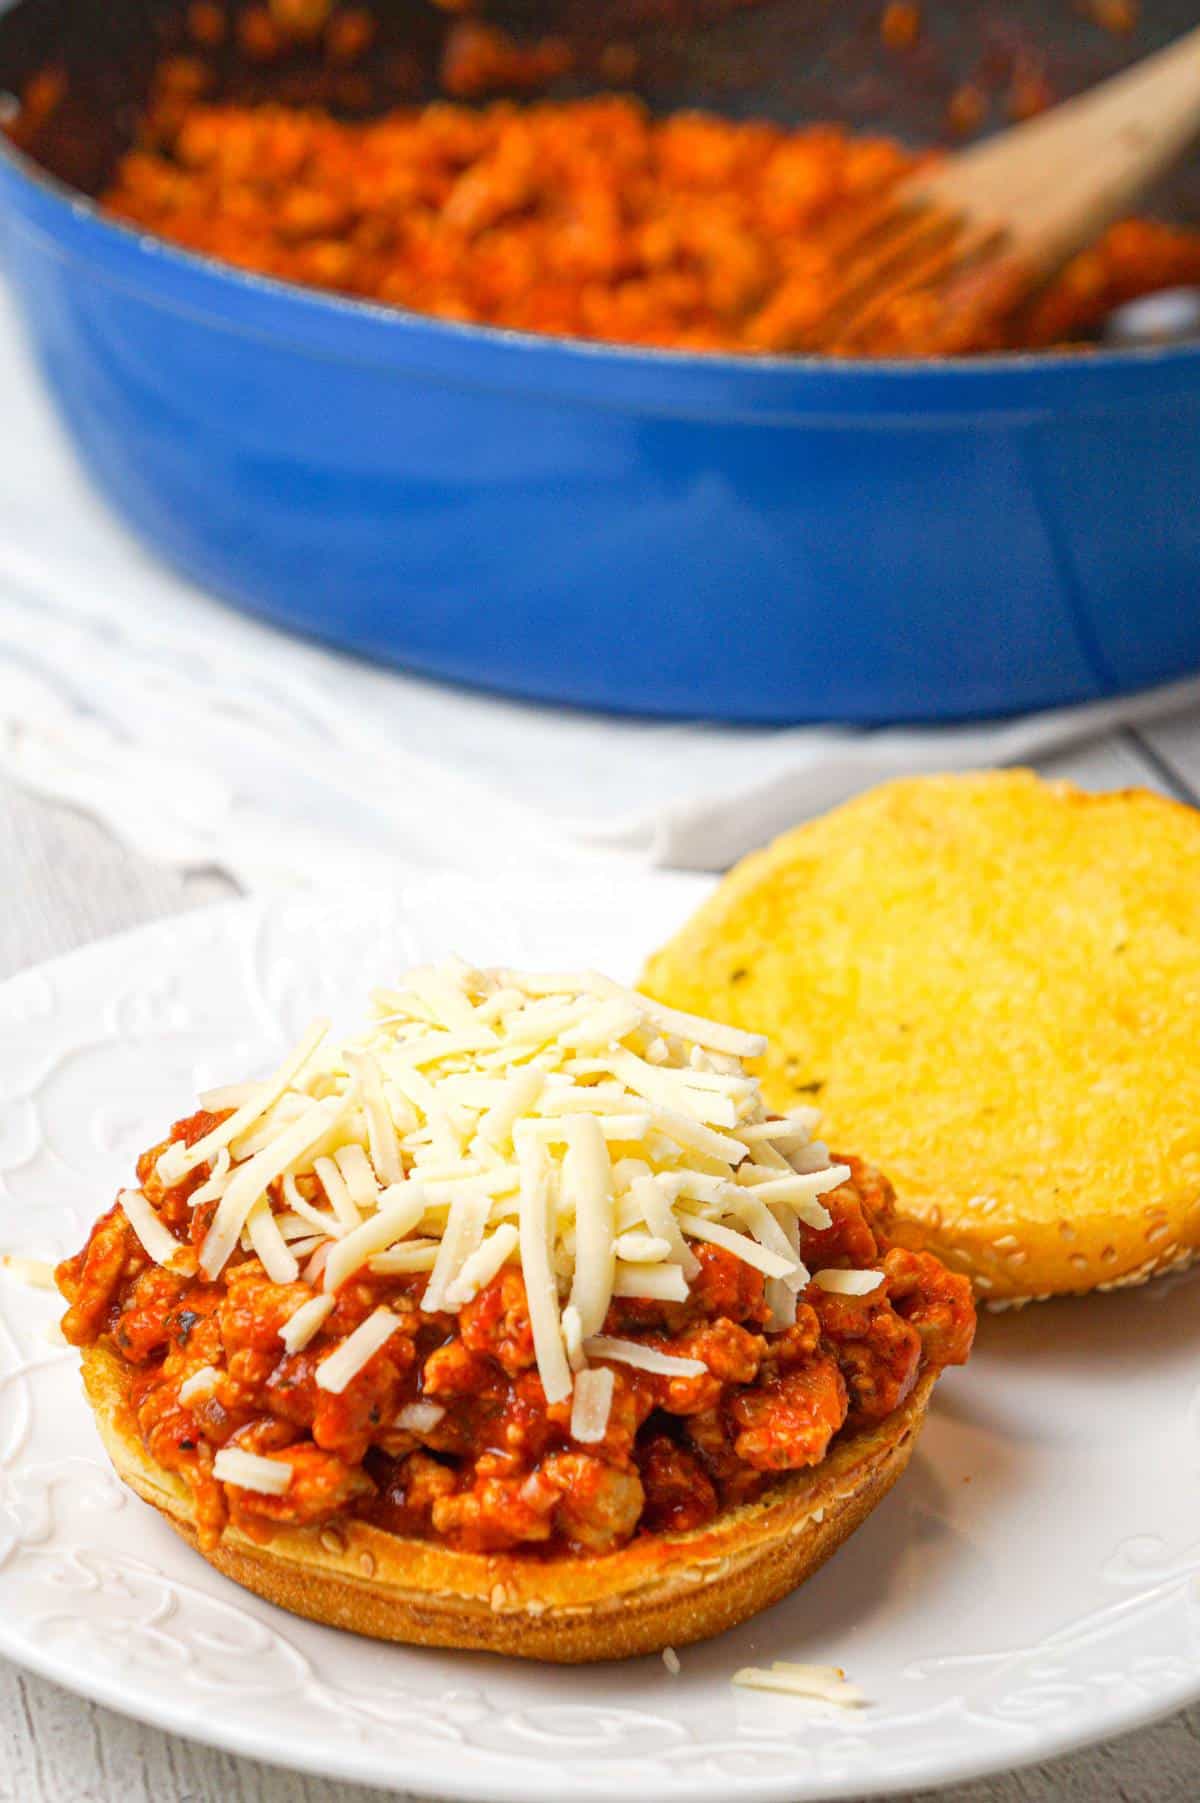 Chicken Parmesan Sloppy Joes are an easy weeknight dinner recipe made with ground chicken tossed in marinara, basil pesto and Parmesan cheese topped with shredded mozzarella and served on a toasted garlic butter brioche bun.